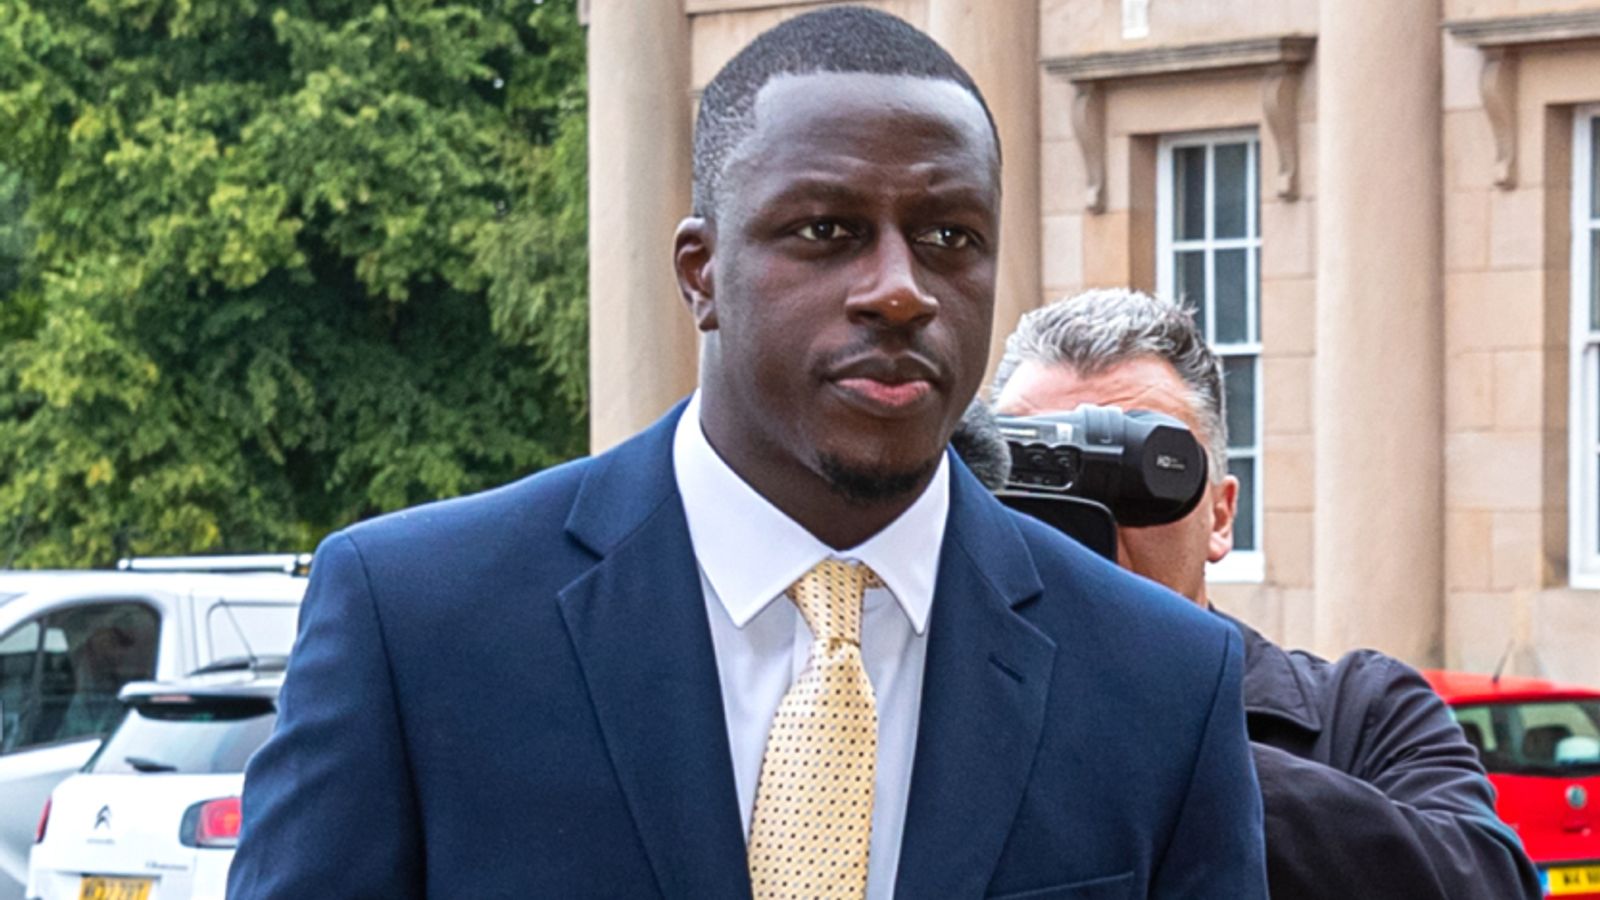 Manchester City’s Benjamin Mendy cleared of one rape charge